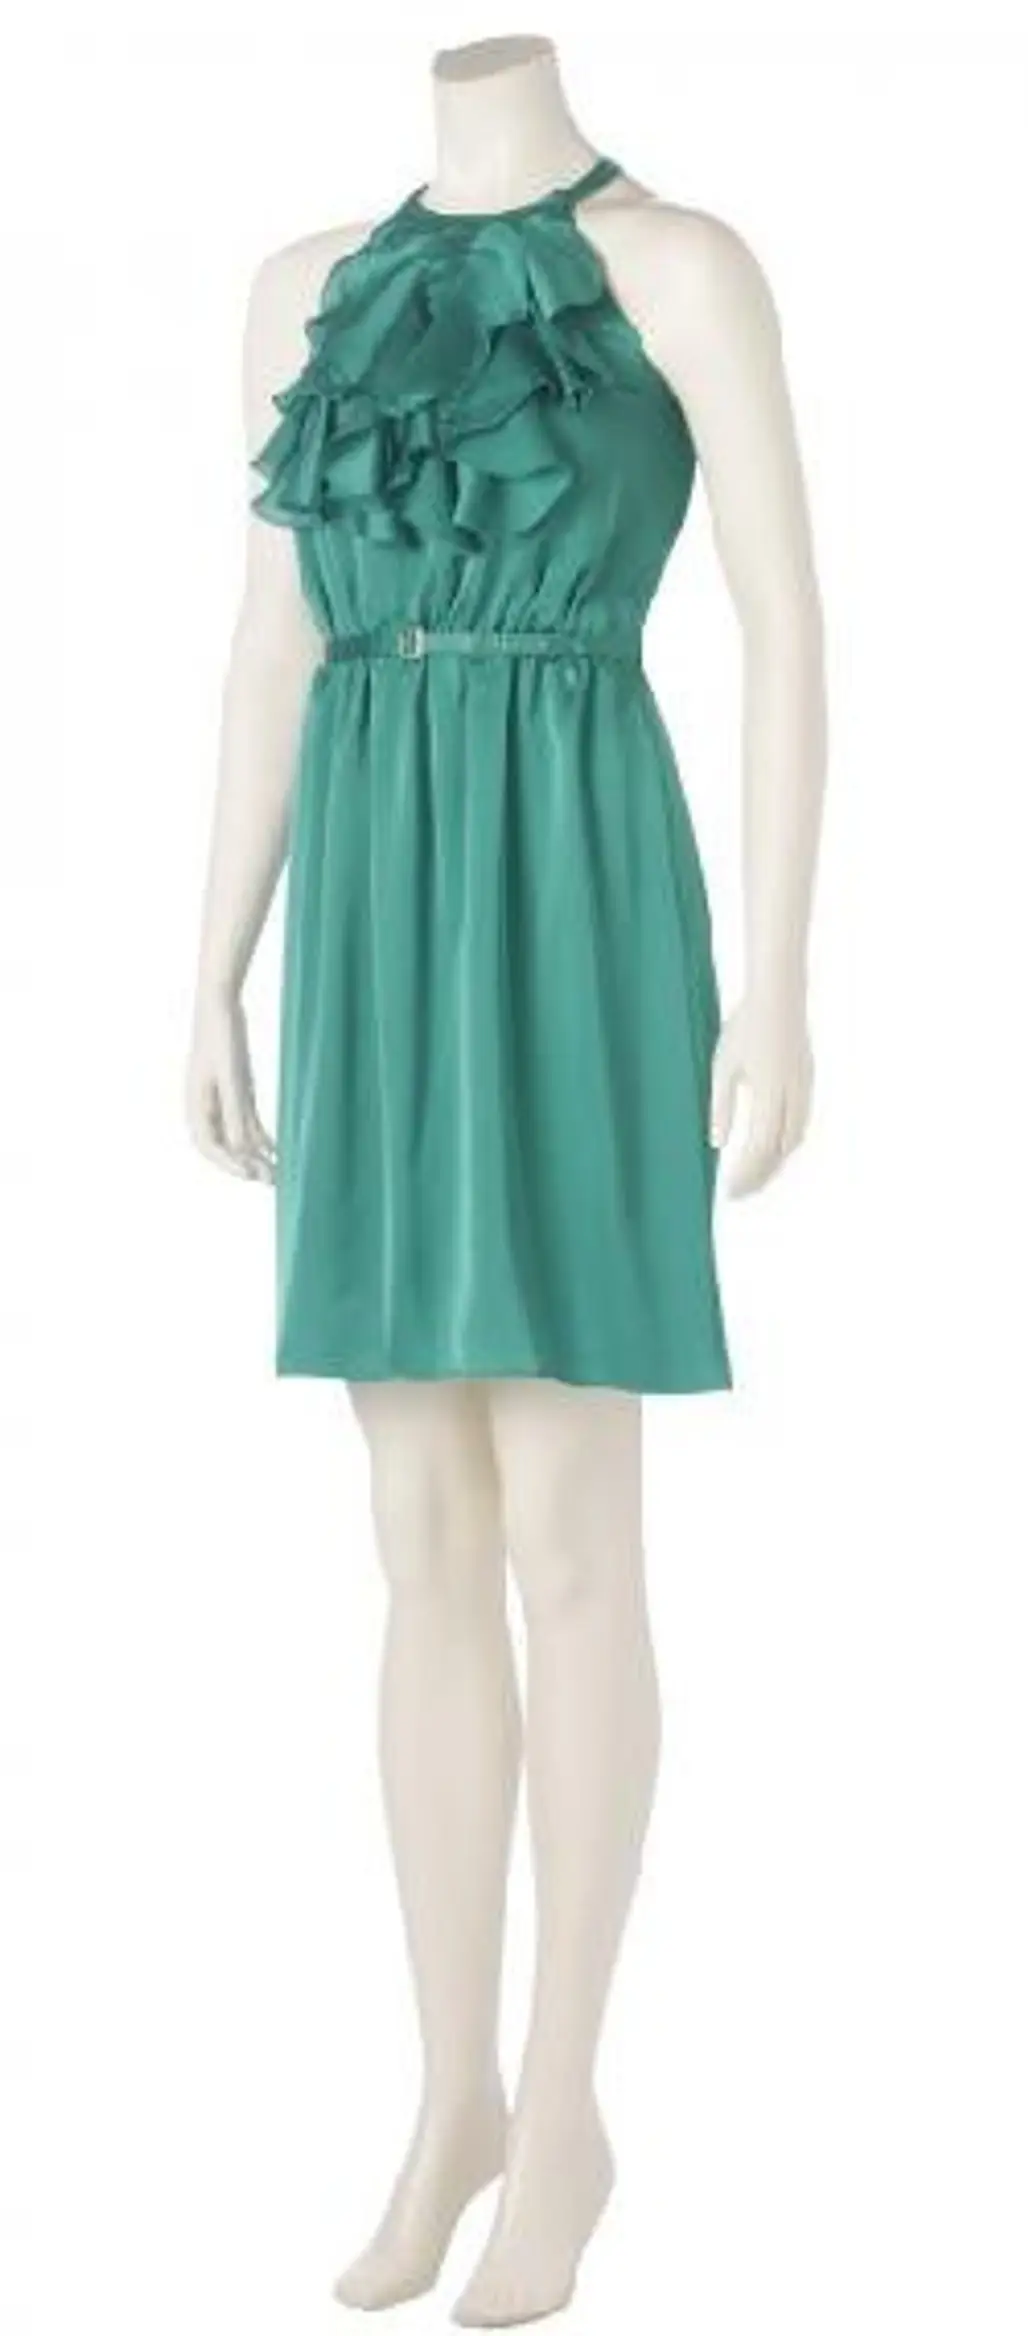 Green Ruffled Dress from the Limited - $89.50